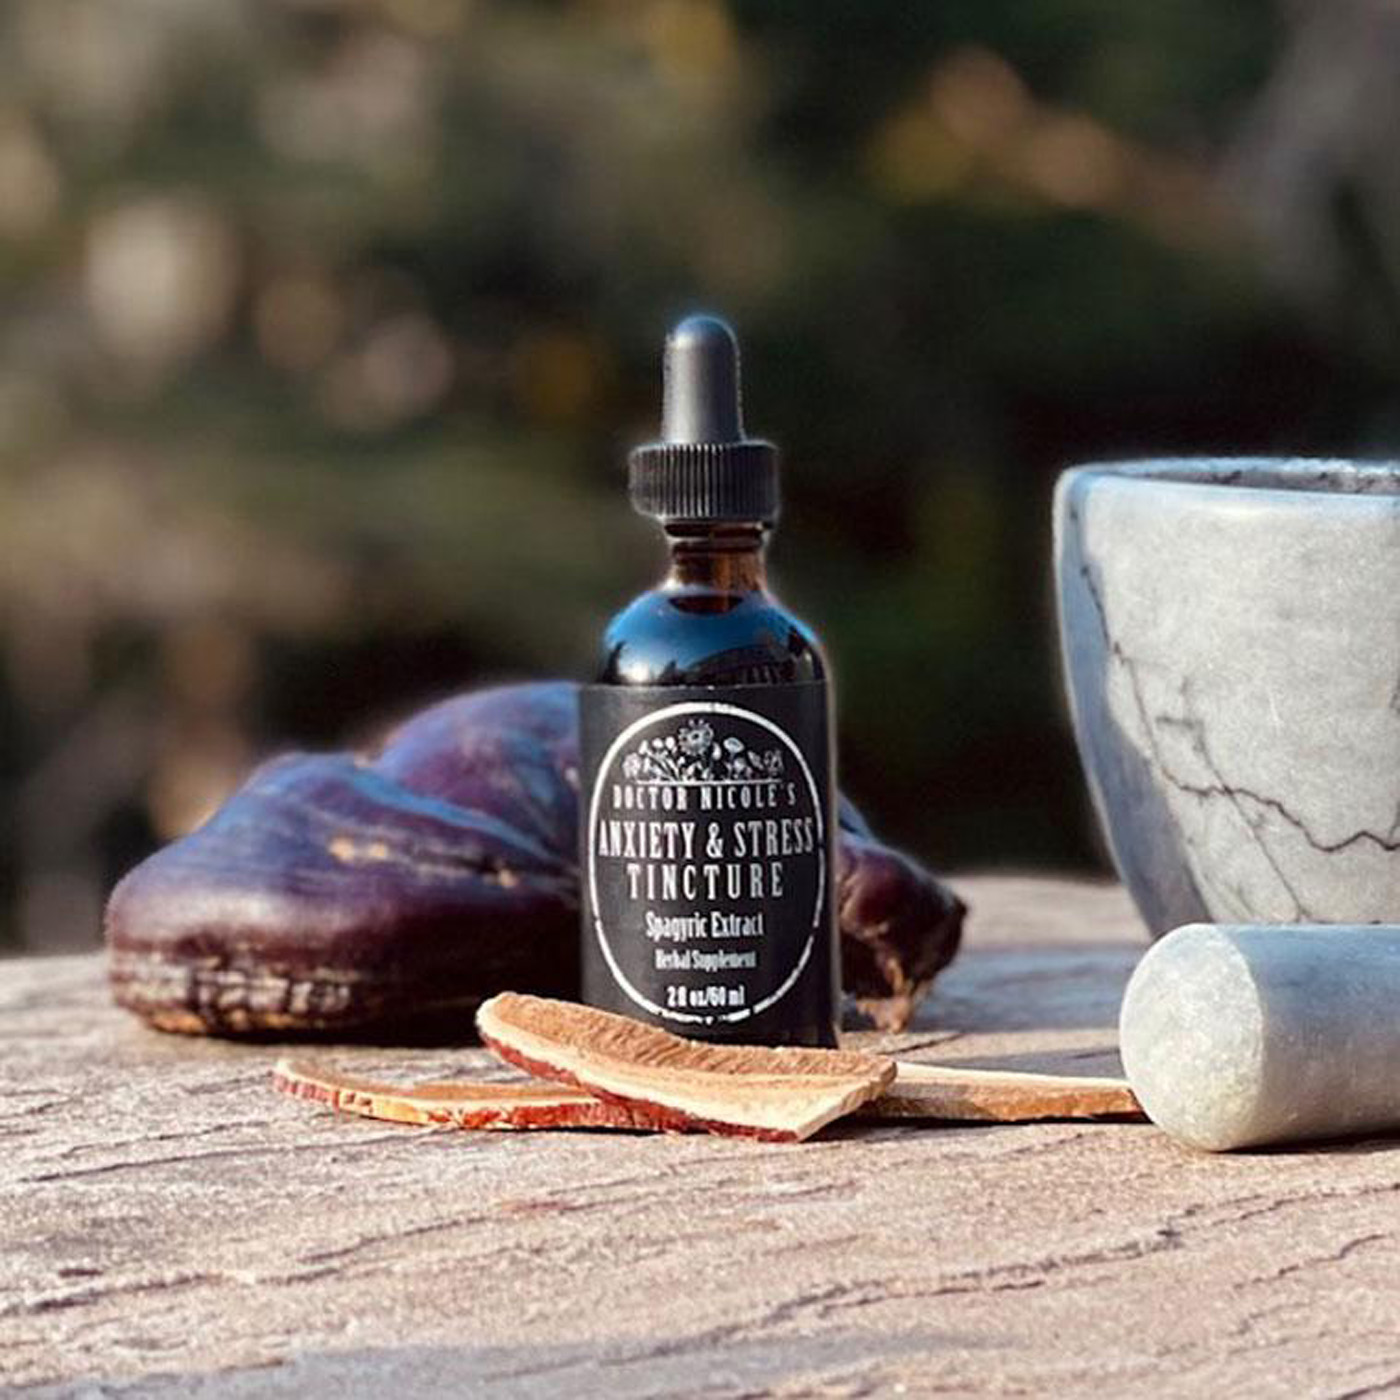 Nicole's Apothecary Anxiety & Stress Tincture